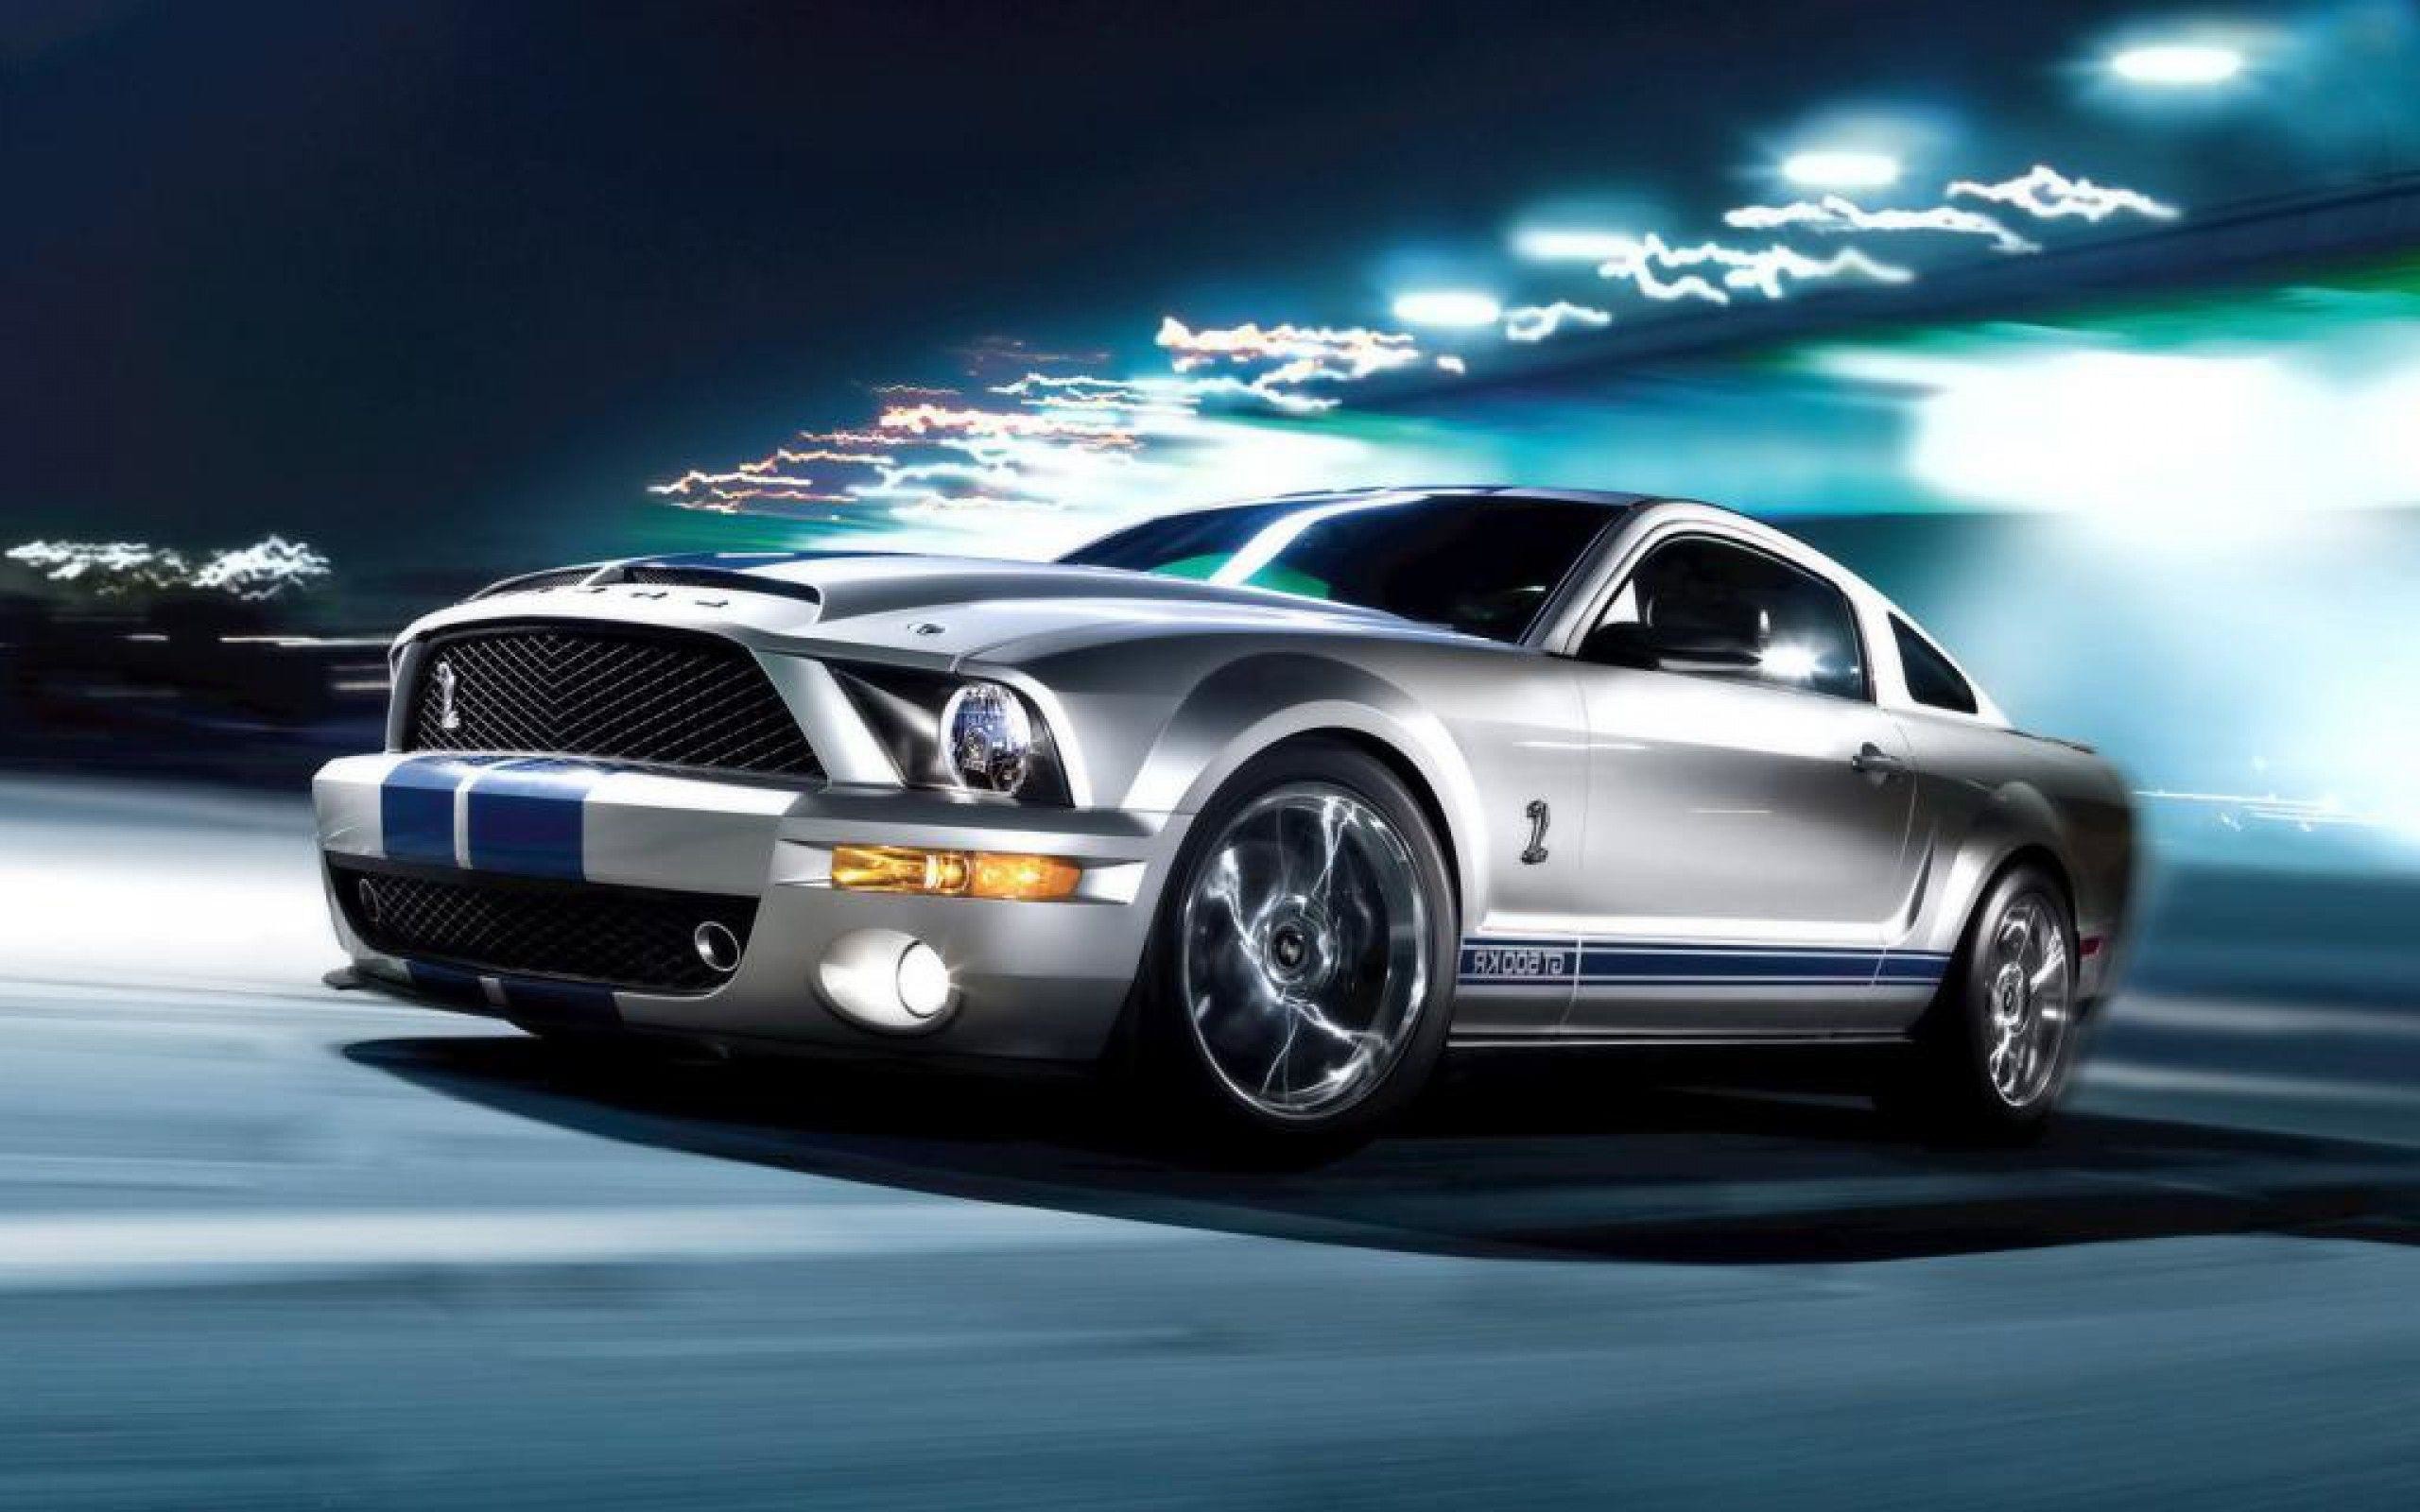 2560x1600 Shelby Mustang Wallpapers - Wallpaper Cave